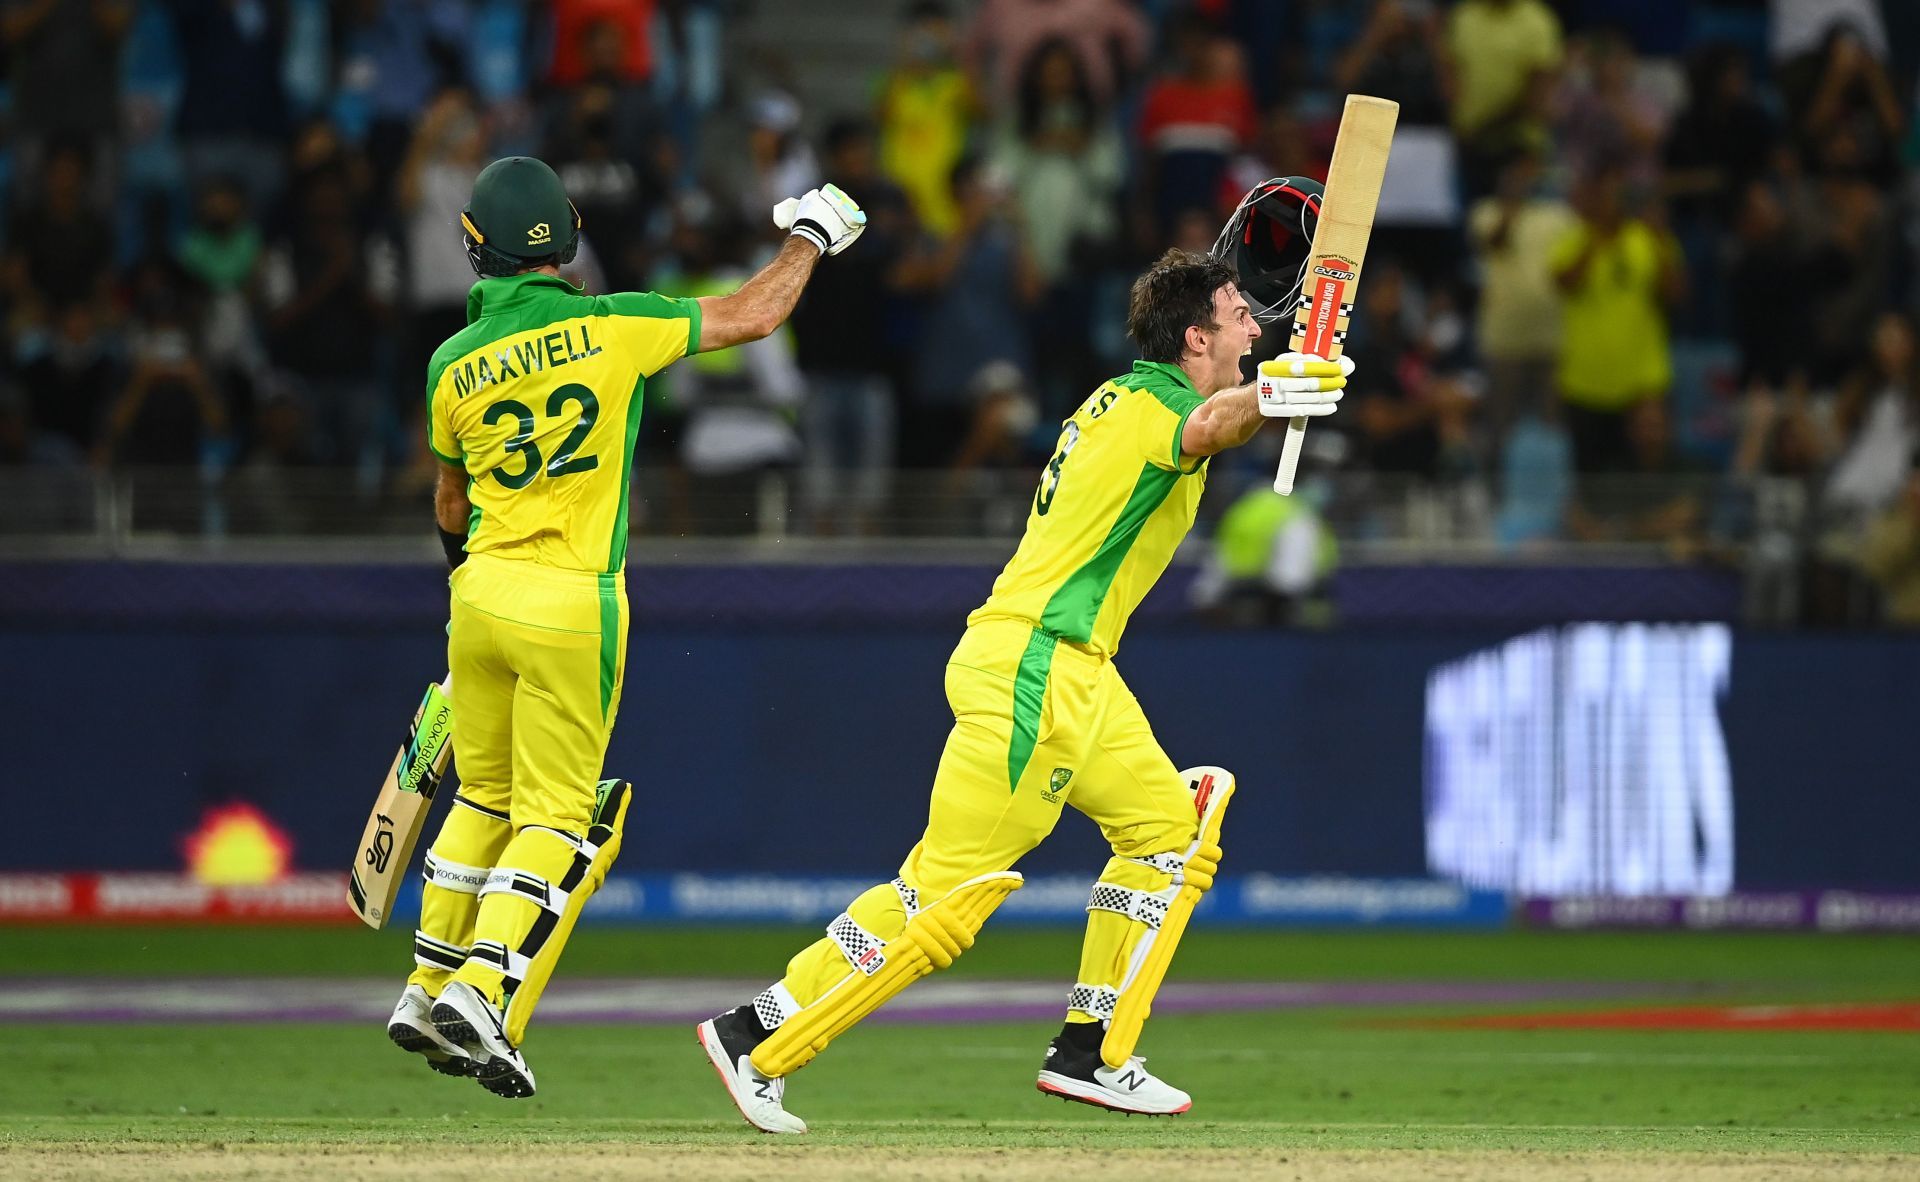 Mitchell Marsh played a match-winning knock in the mega final (Credit: Getty Images)